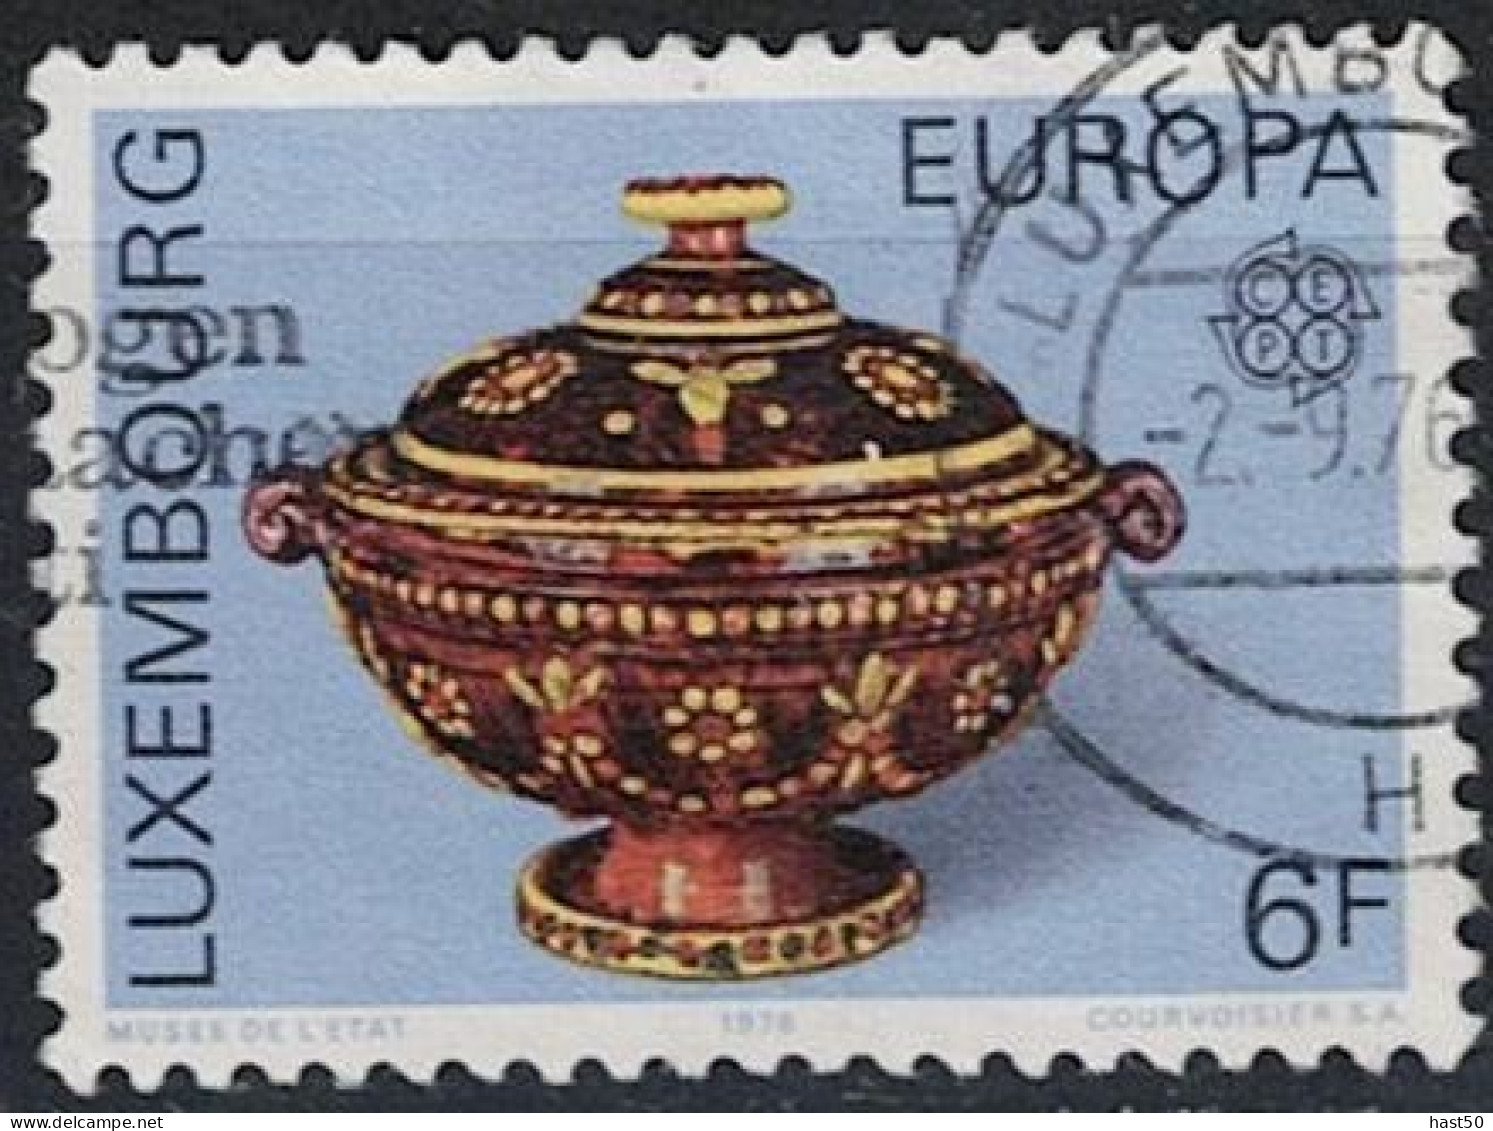 Luxemburg - Europa (MiNr: 928) 1976 - Gest Used Obl - Used Stamps